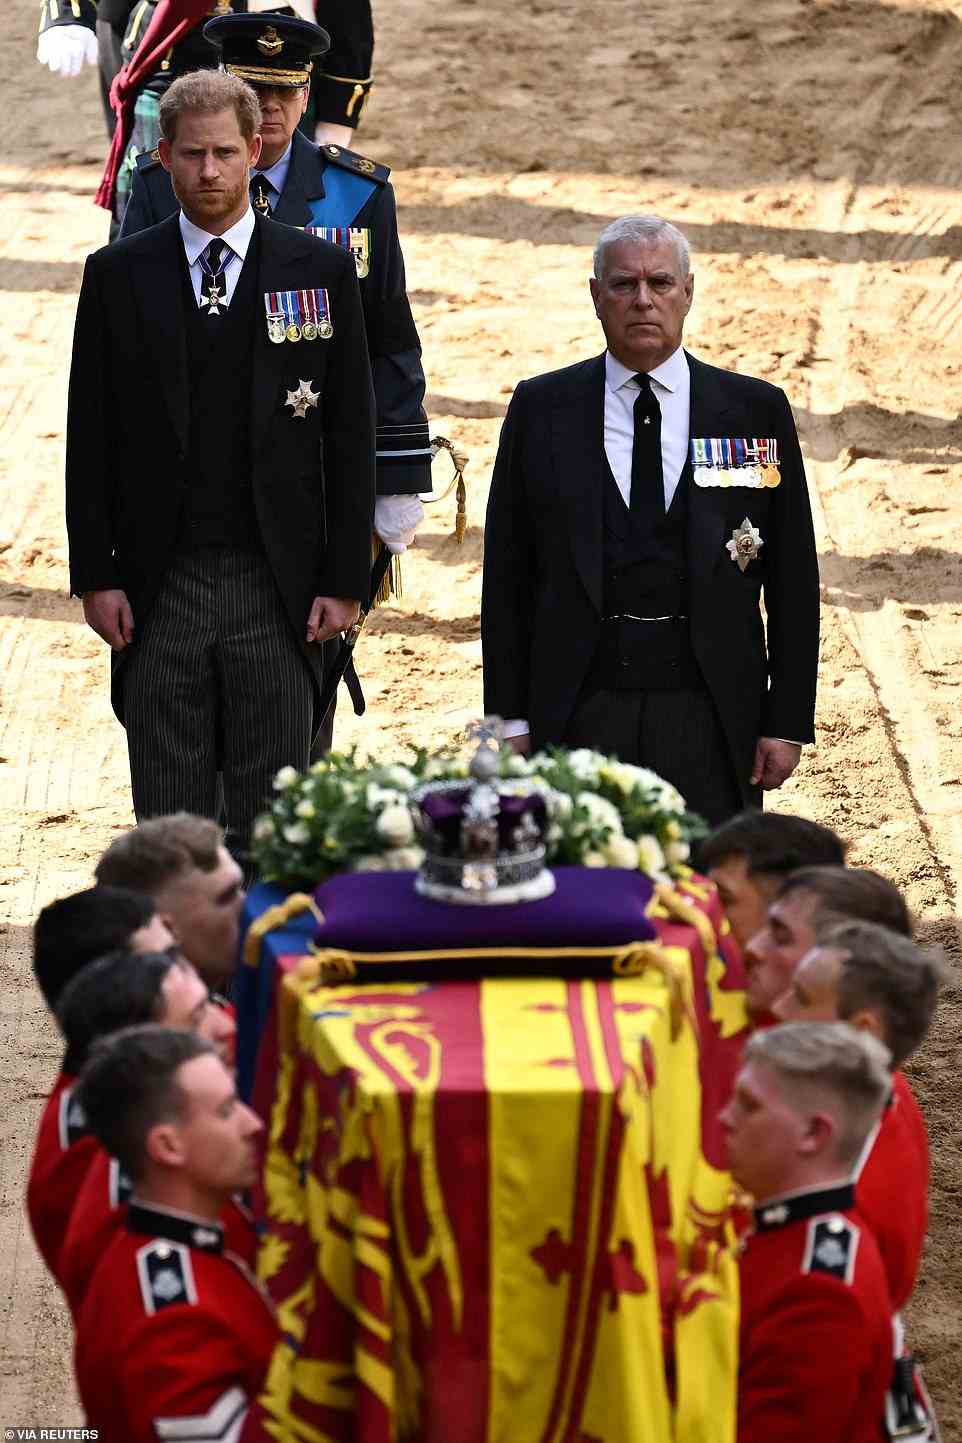 Prince Harry, Duke of Sussex (L) and Britain's Prince Andrew, Duke of York watch as pallbearers from The Queen's Company, 1st Battalion Grenadier Guards prepare to carry the coffin